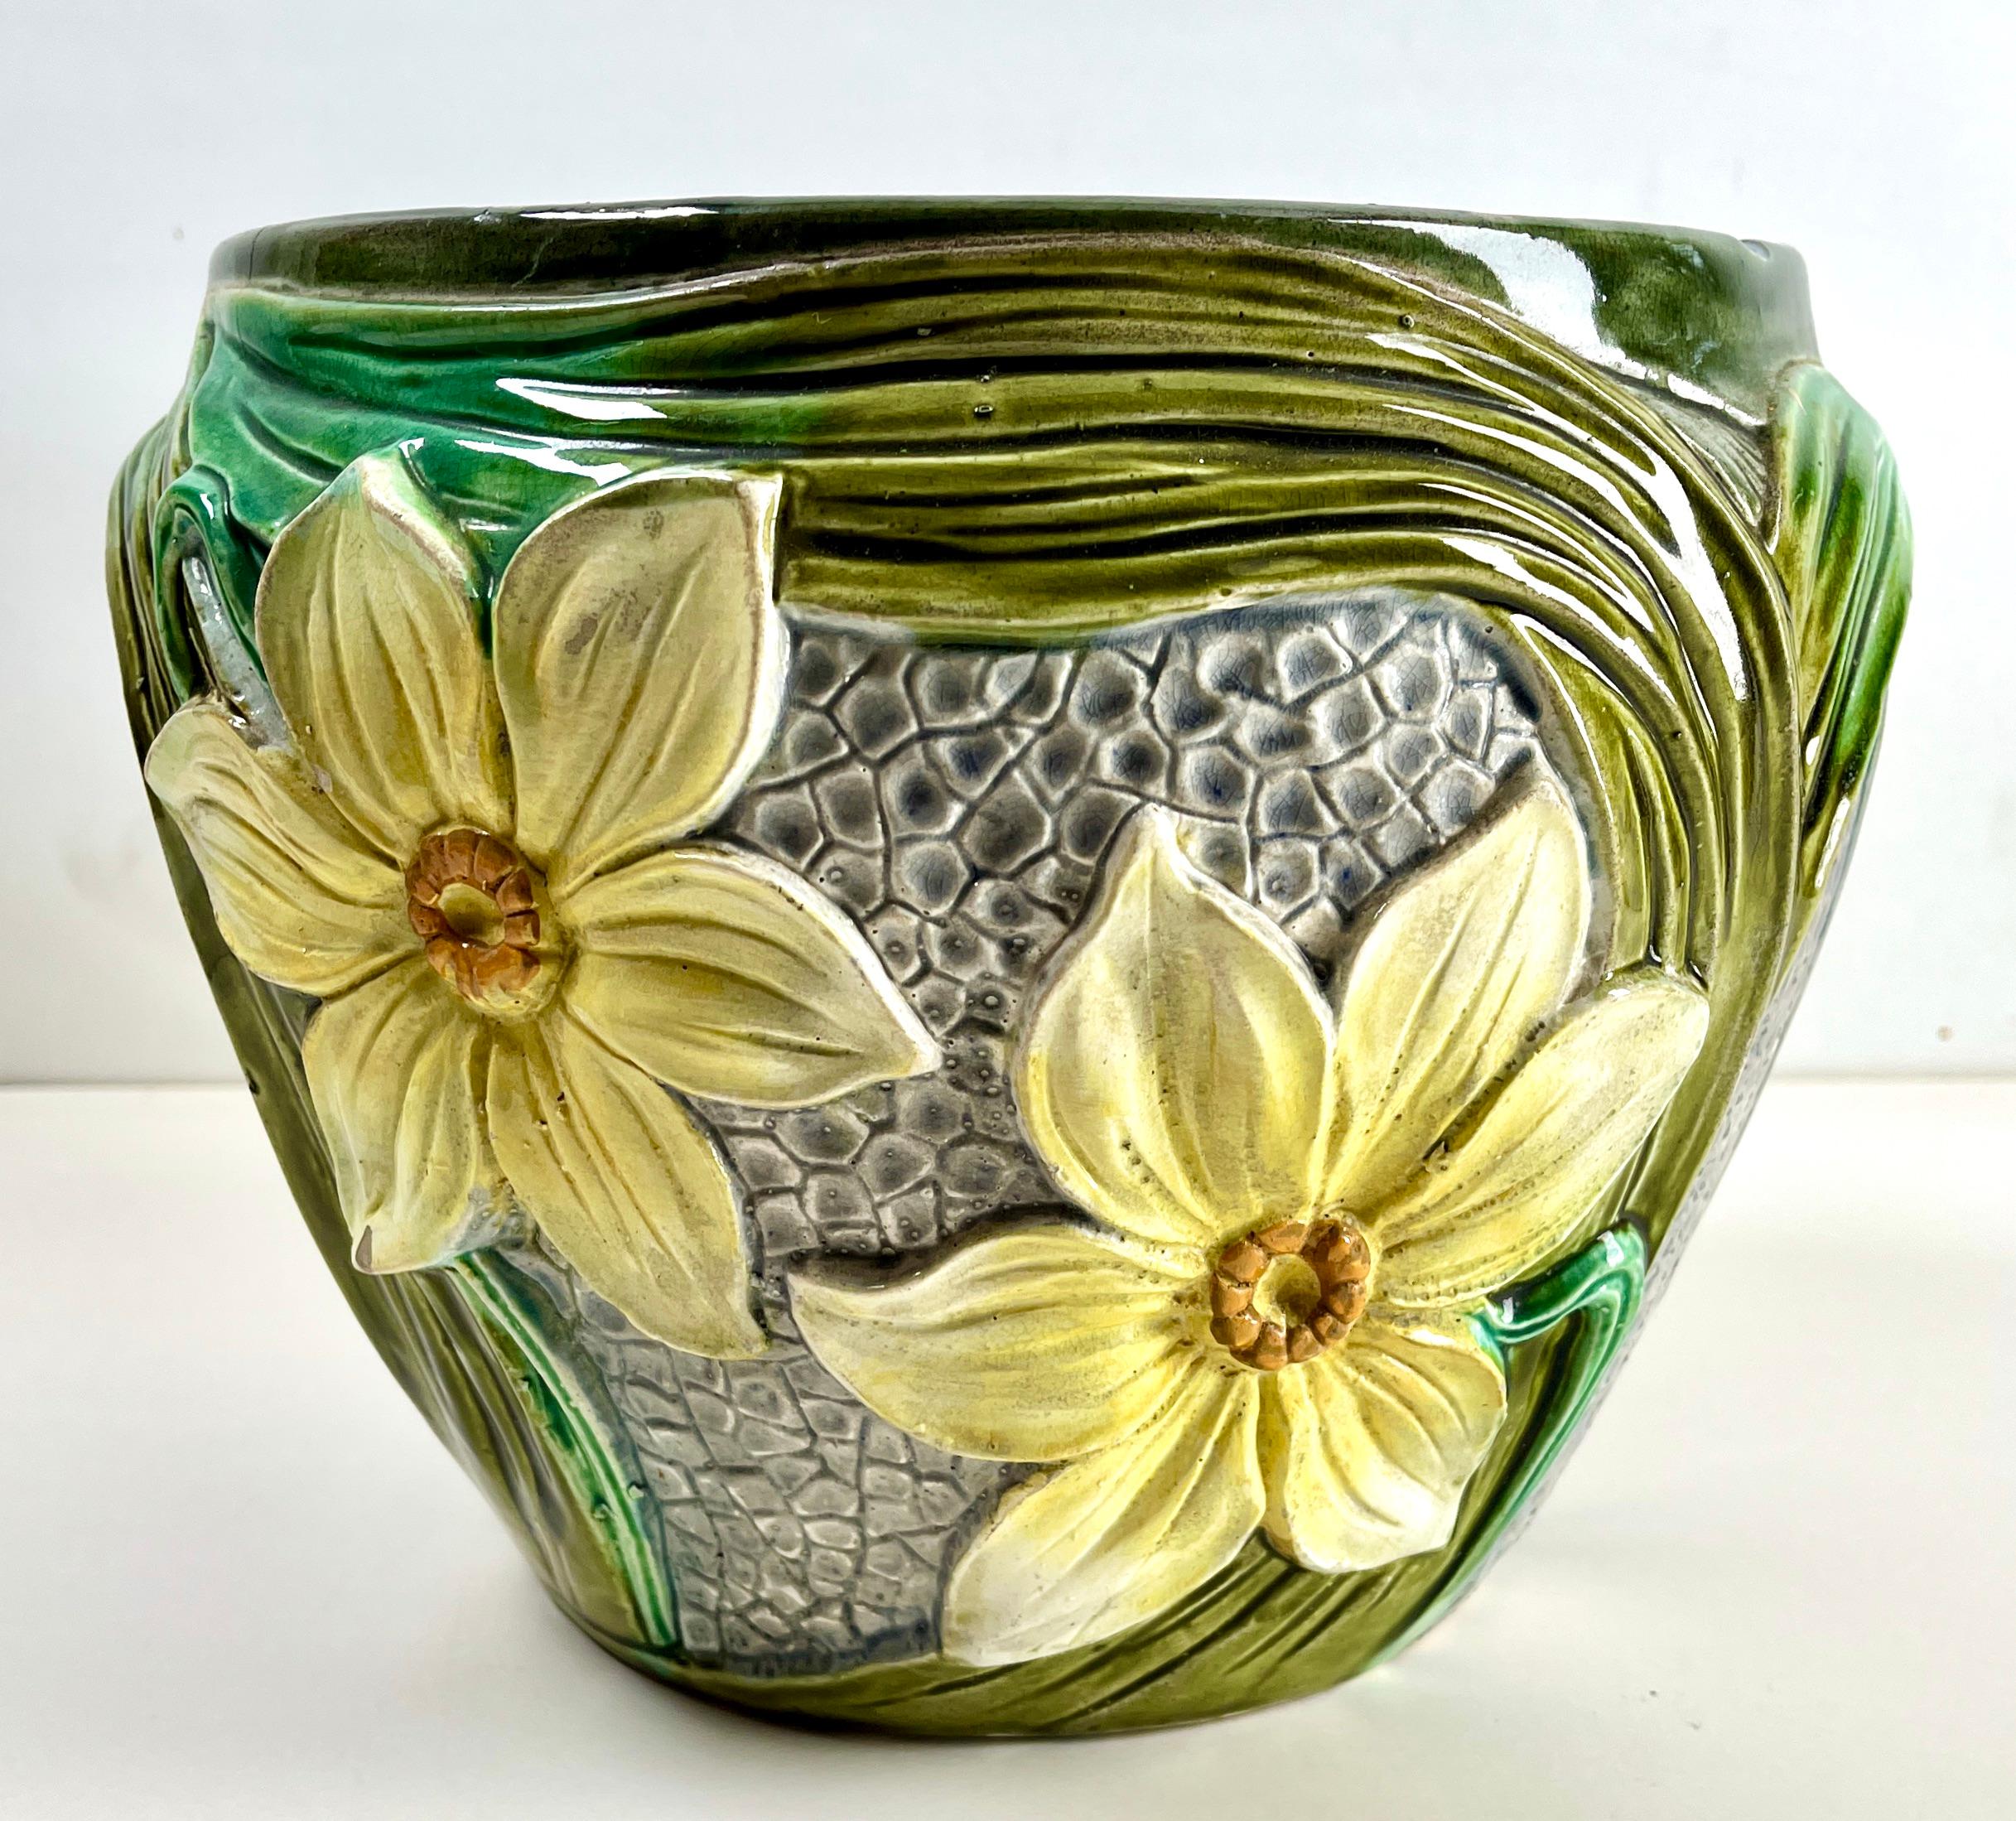 Brilliant handmade hand-glazed Art Nouveau planter jardinière, 1930.

Handmade and hand-glazed in brilliant colored details.
Made in Belgium
Art Nouveau period 1930 fine quality.
The pieces are in Good condition and a real beauty.

One vase